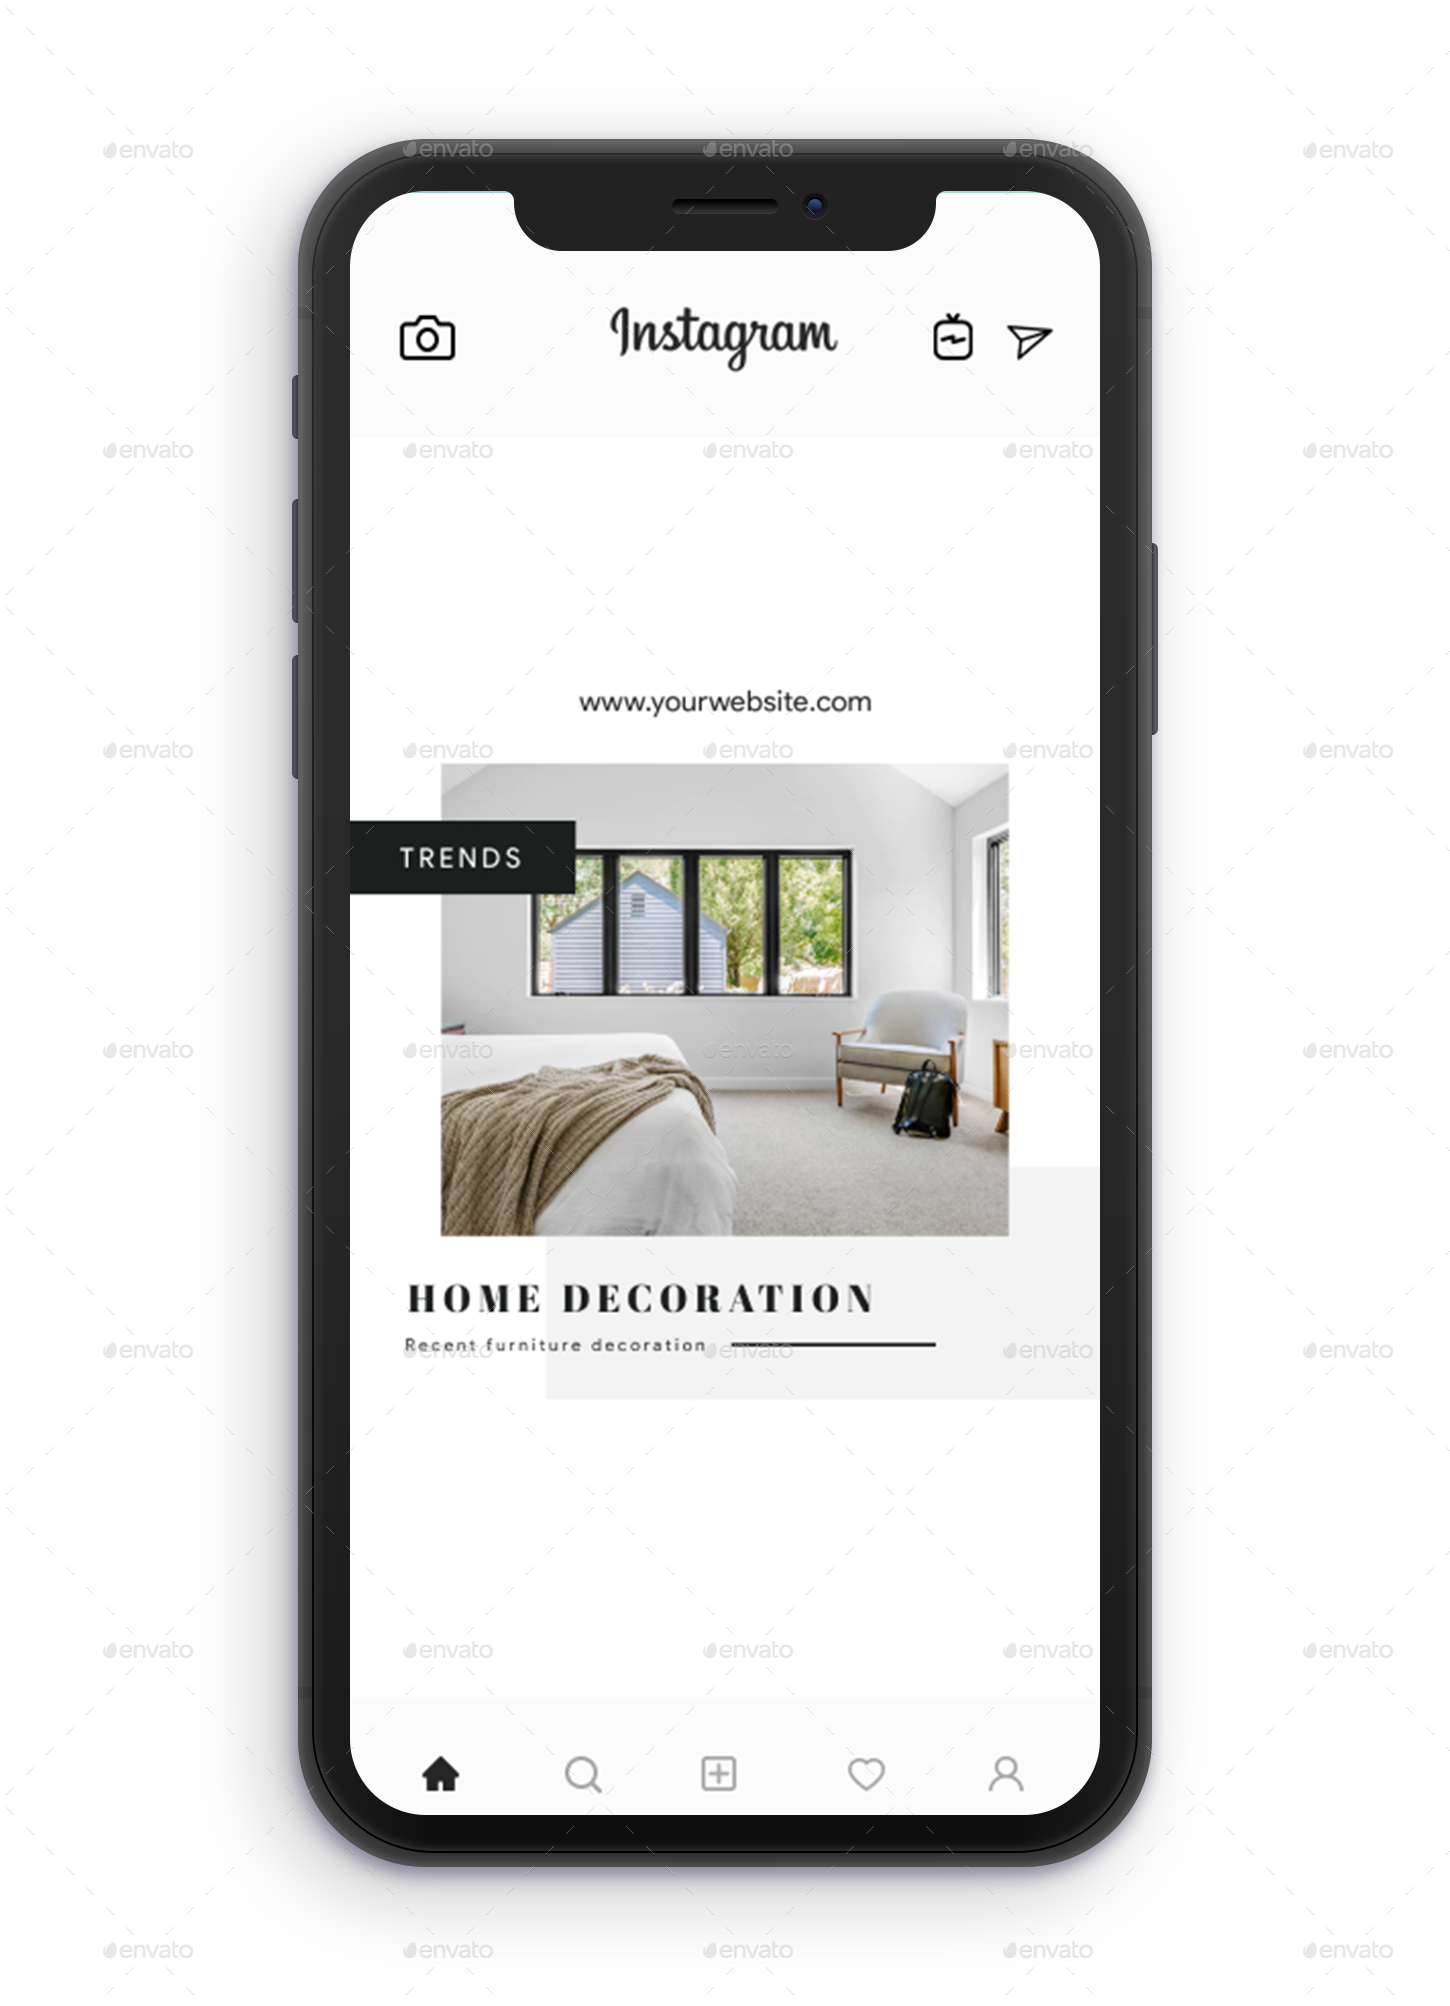 Download 10 Instagram Post - Home Decoration by Pinozah_ | GraphicRiver